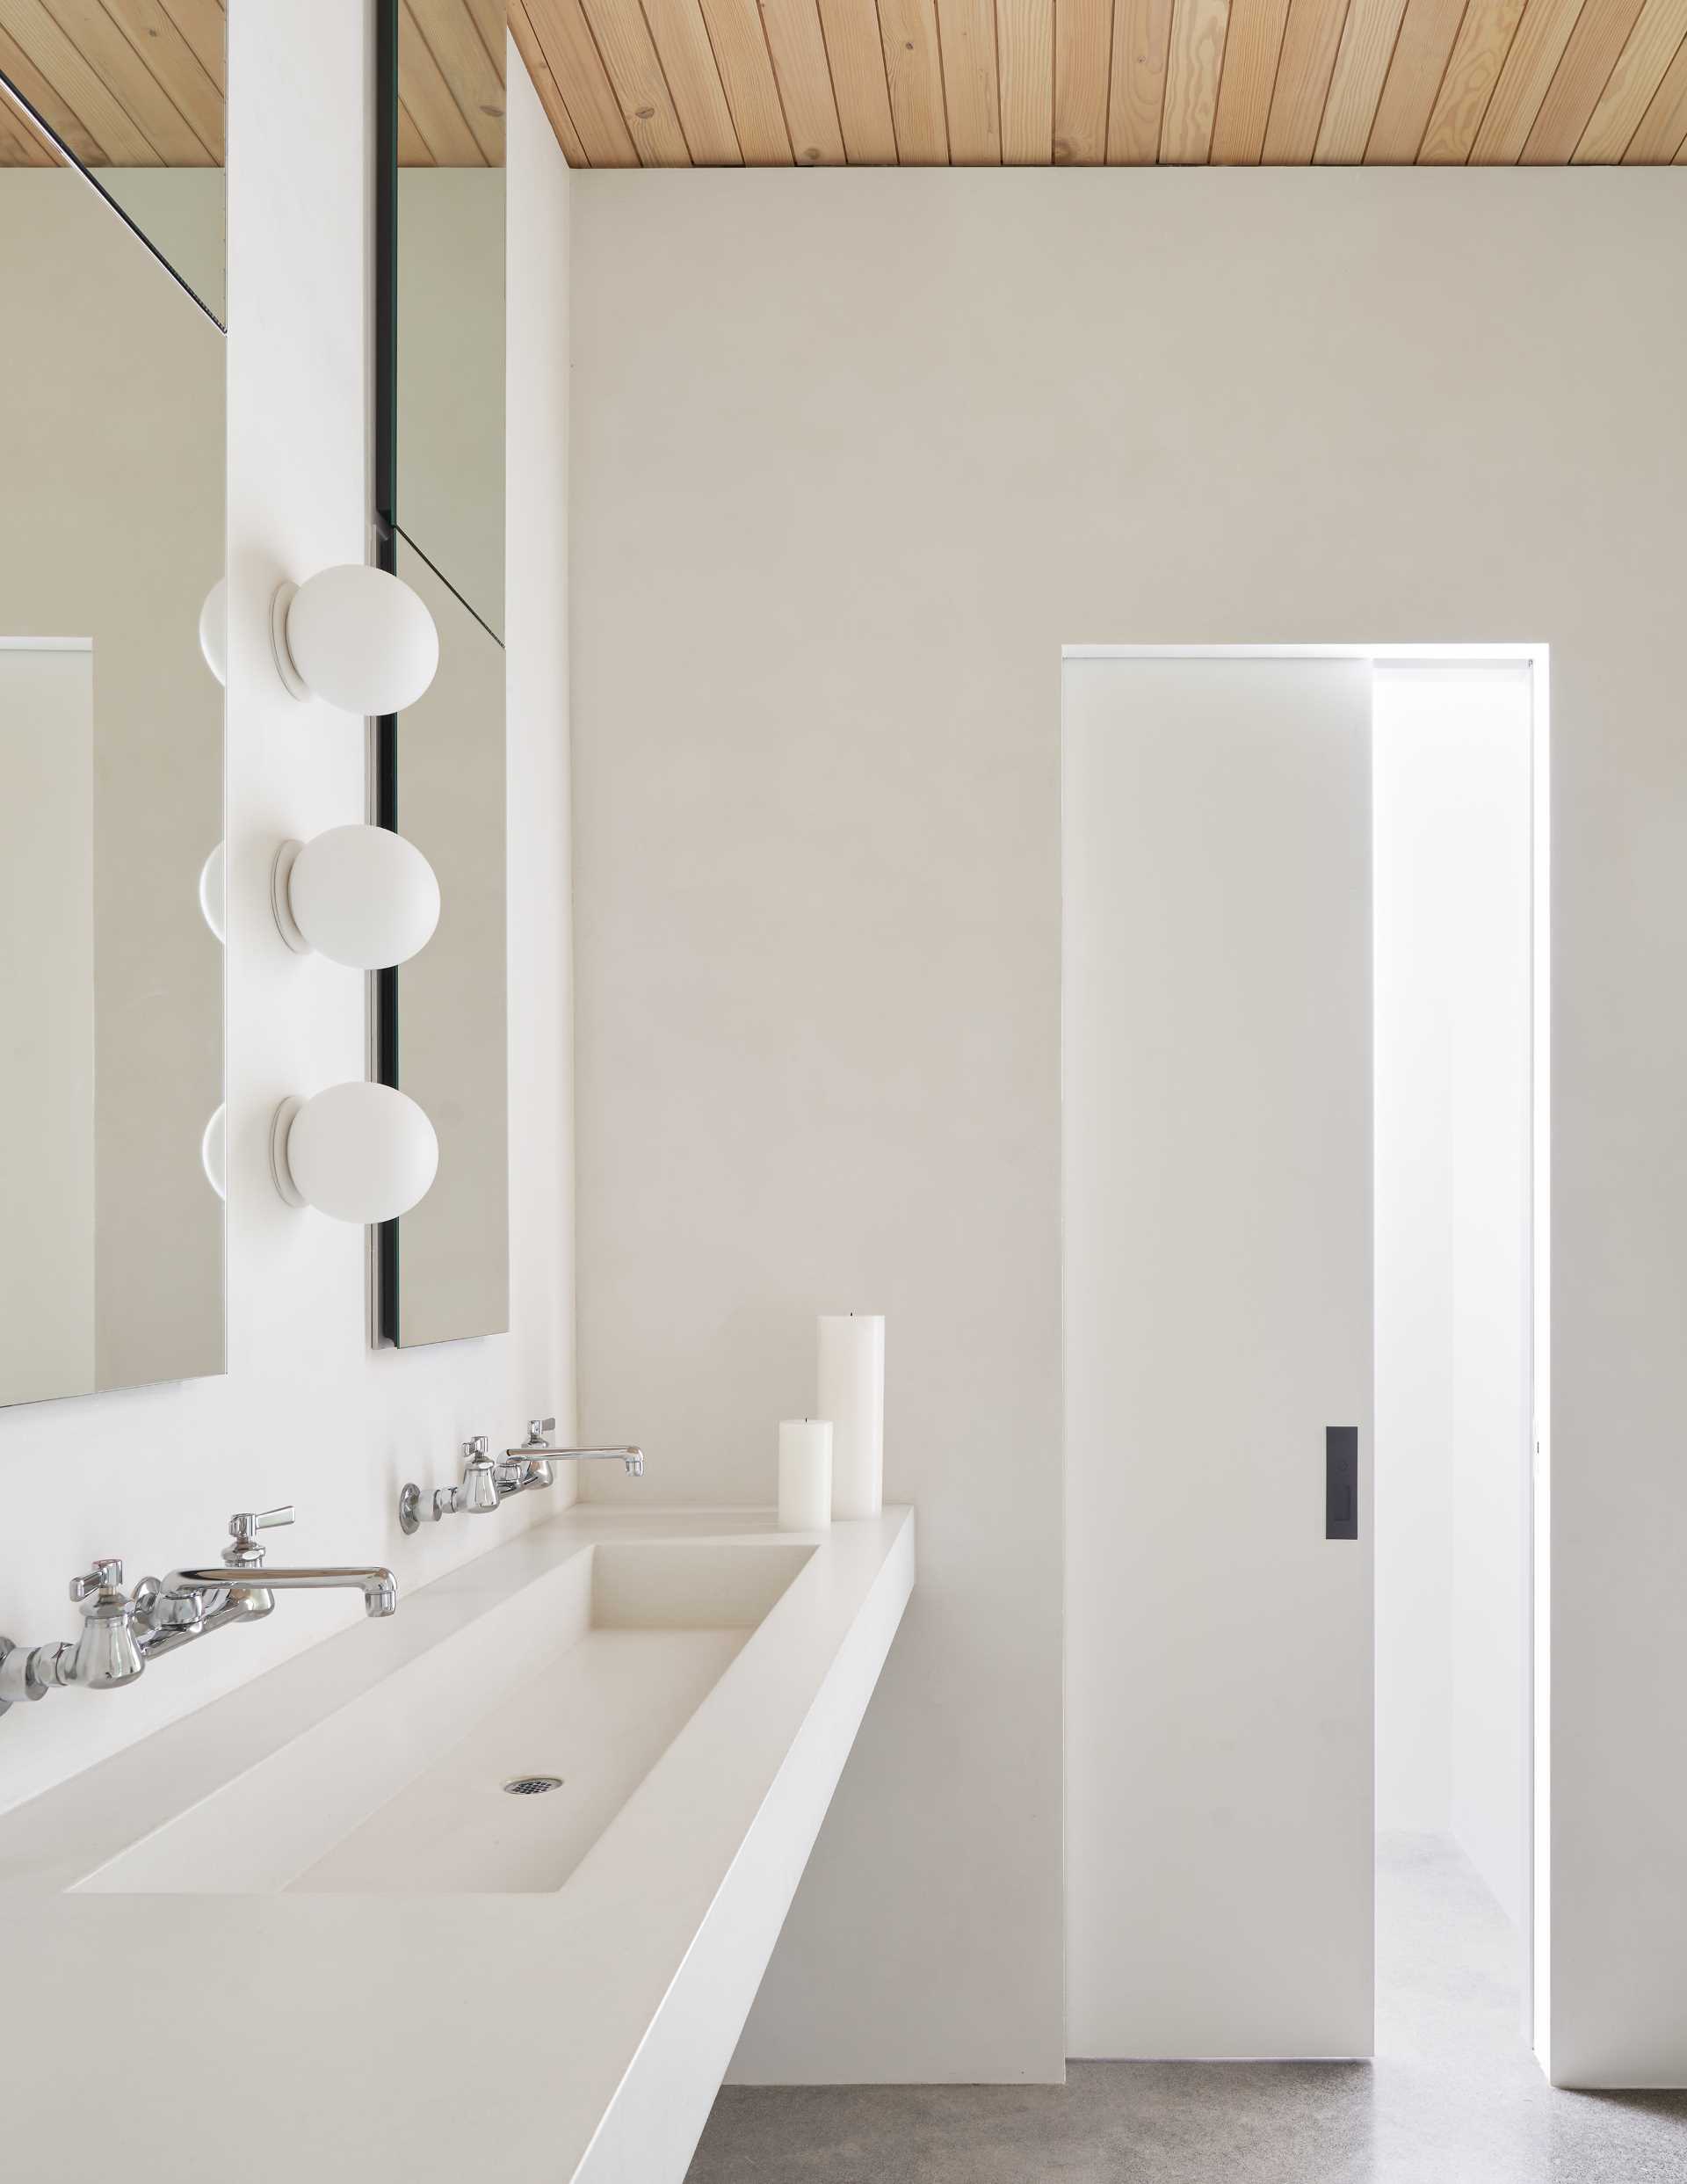 A modern bathroom with a floating custom concrete sink and tall mirrors.